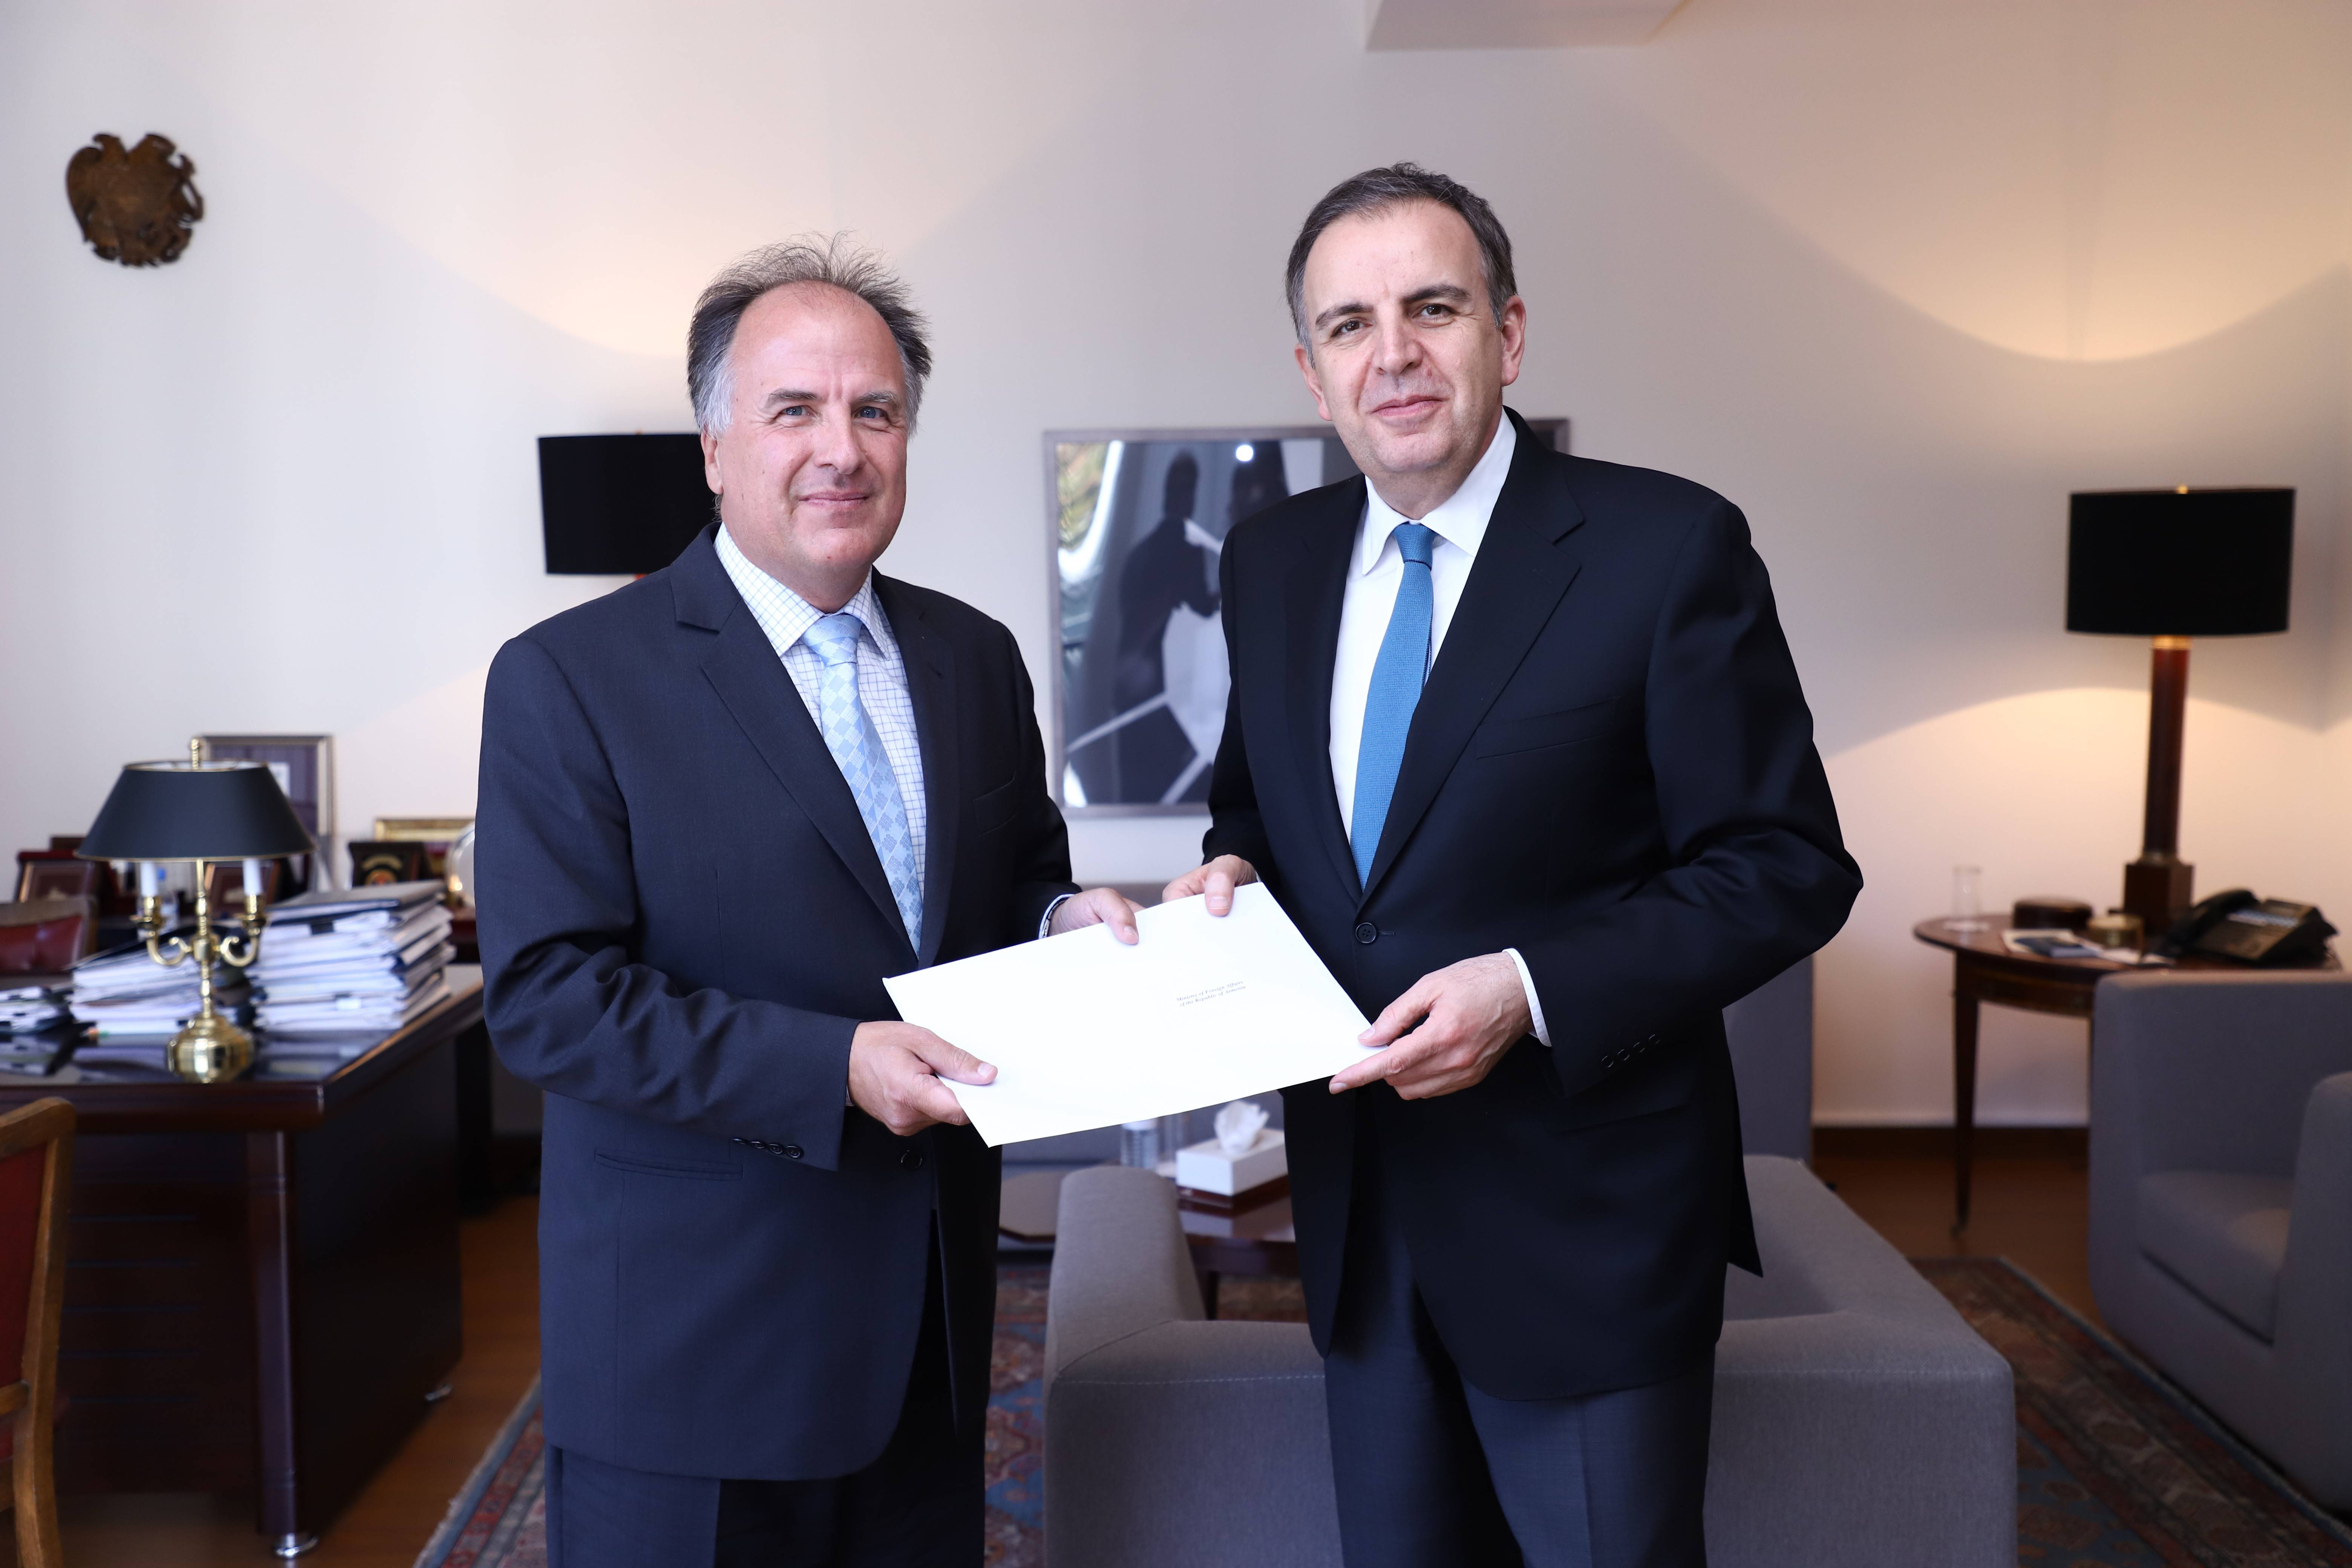 The newly appointed Ambassador of Croatia to Armenia presented copies of his credentials to Deputy Foreign Minister Garen Nazarian